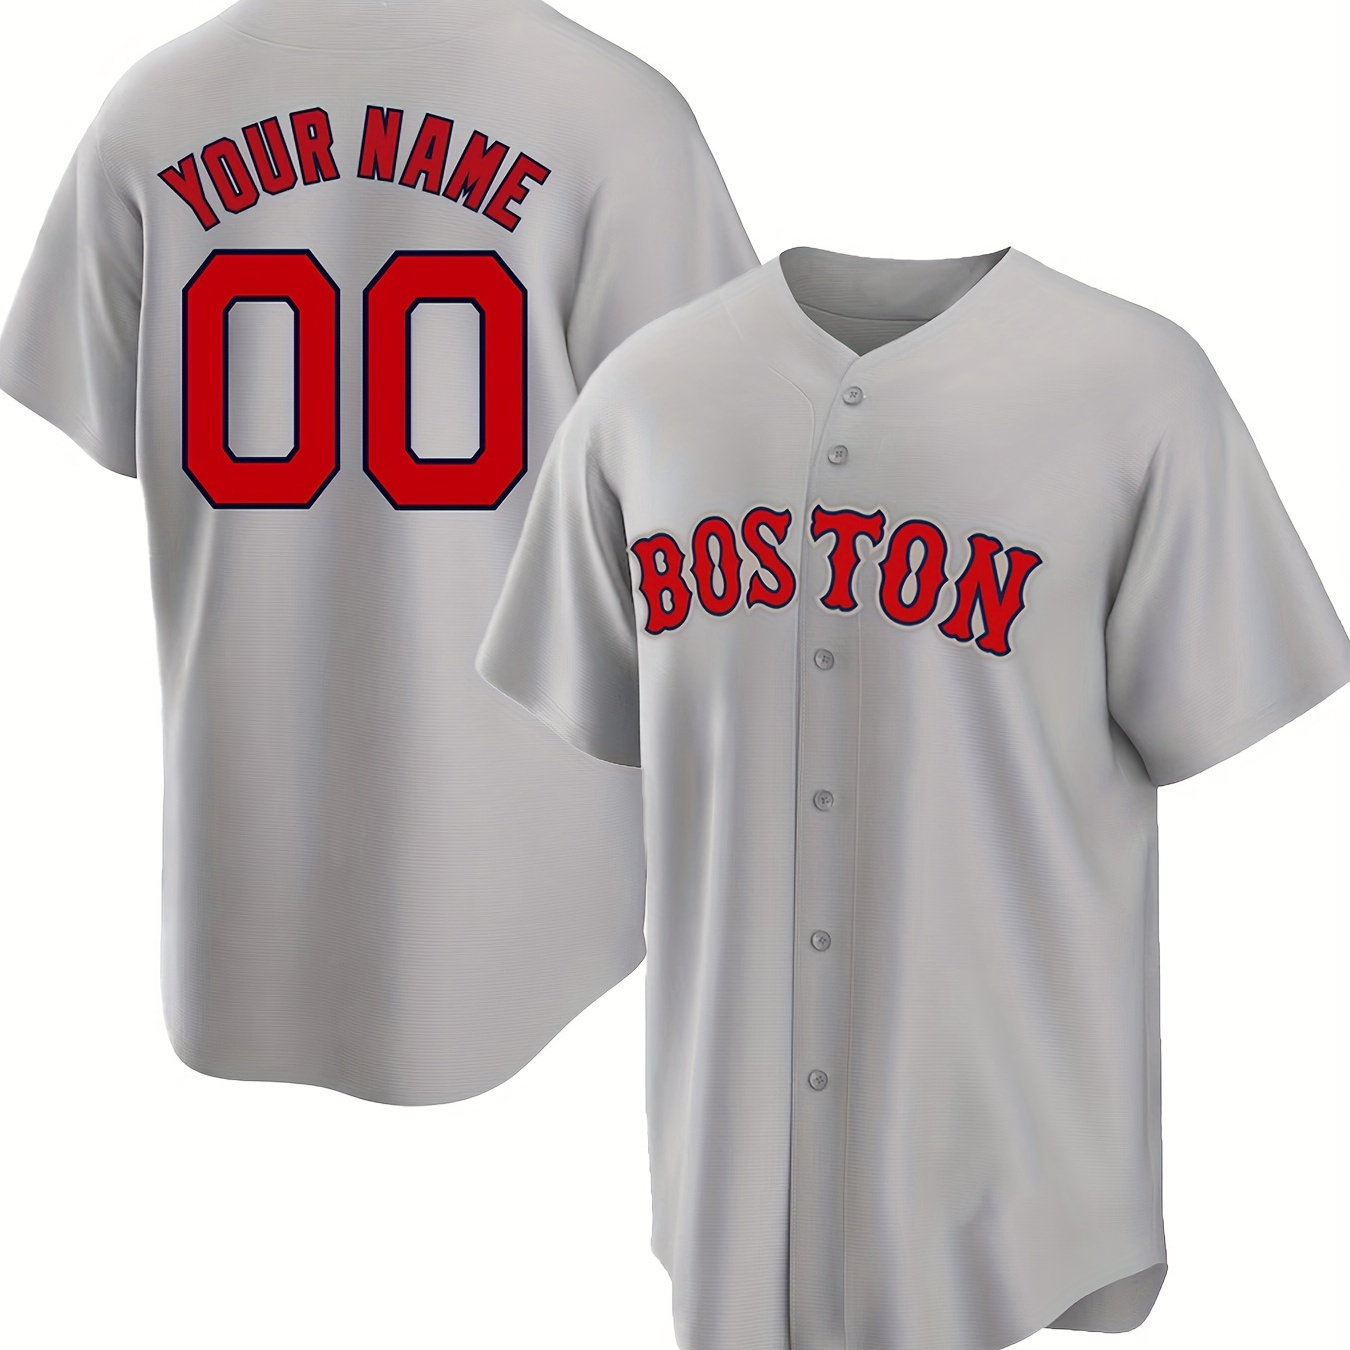 

Men's Customizable Name And Number Design Baseball Jersey Shirt, Boston Letters Pattern Leisure Outdoor Sports Sweat Shirt For Match Party Training